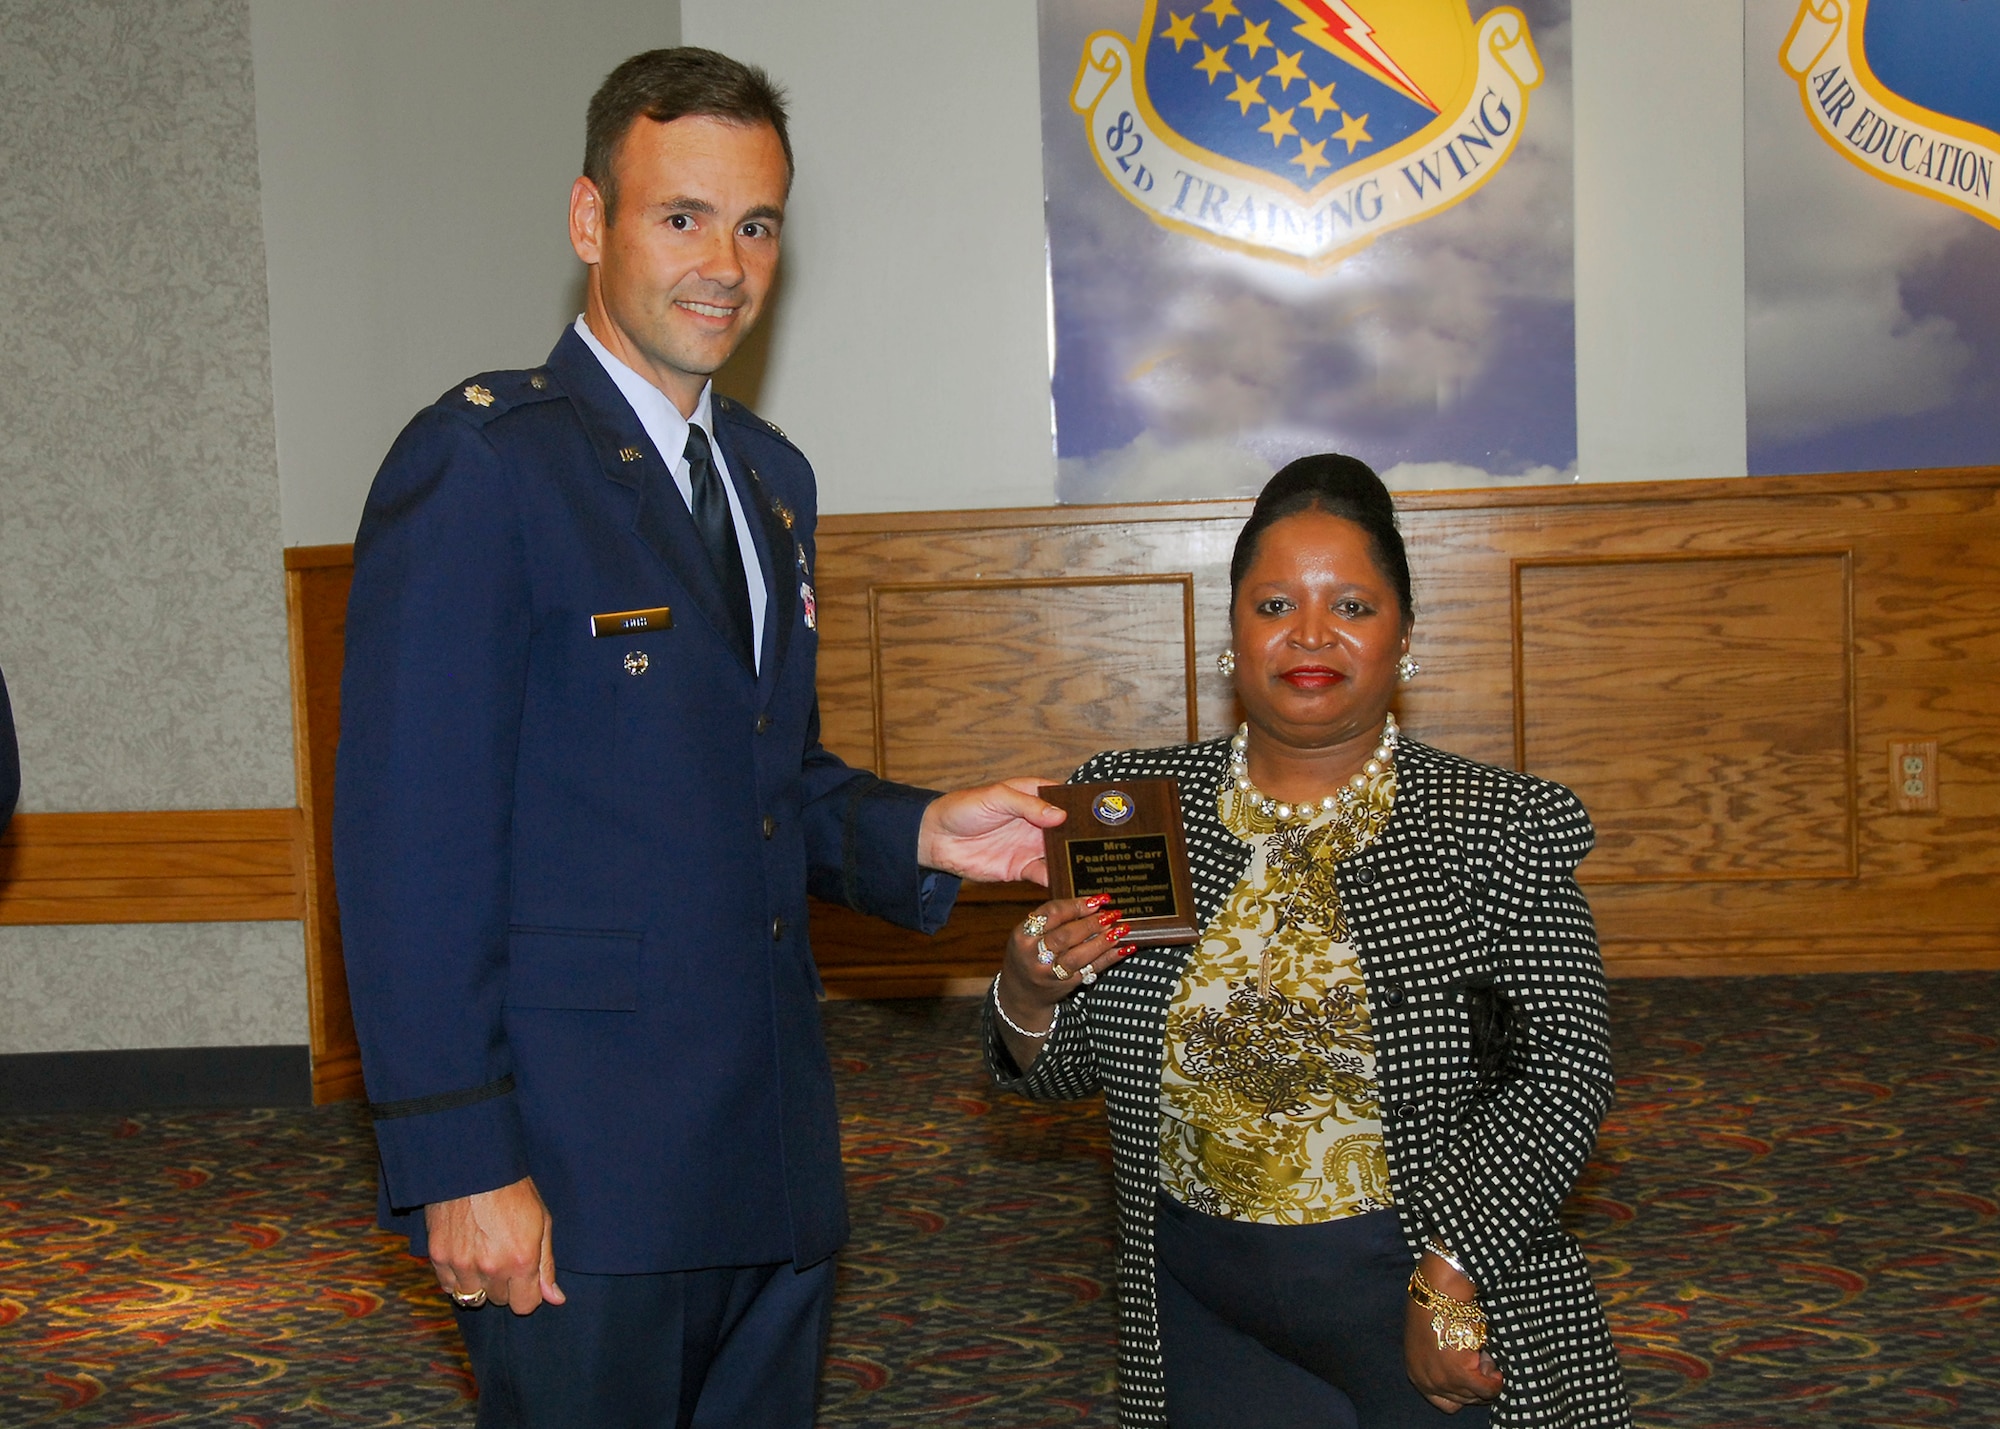 Lt. Col. Porter Smith, 82nd Mission Support Group Deputy Commander, presents Pearlene Carr, 82nd Contracting Squadron, a plaque for speaking at the National Disability Employment Awareness Month luncheon Oct. 23 at the Sheppard Club. (U.S. Air Force photo/Harry Tonemah)